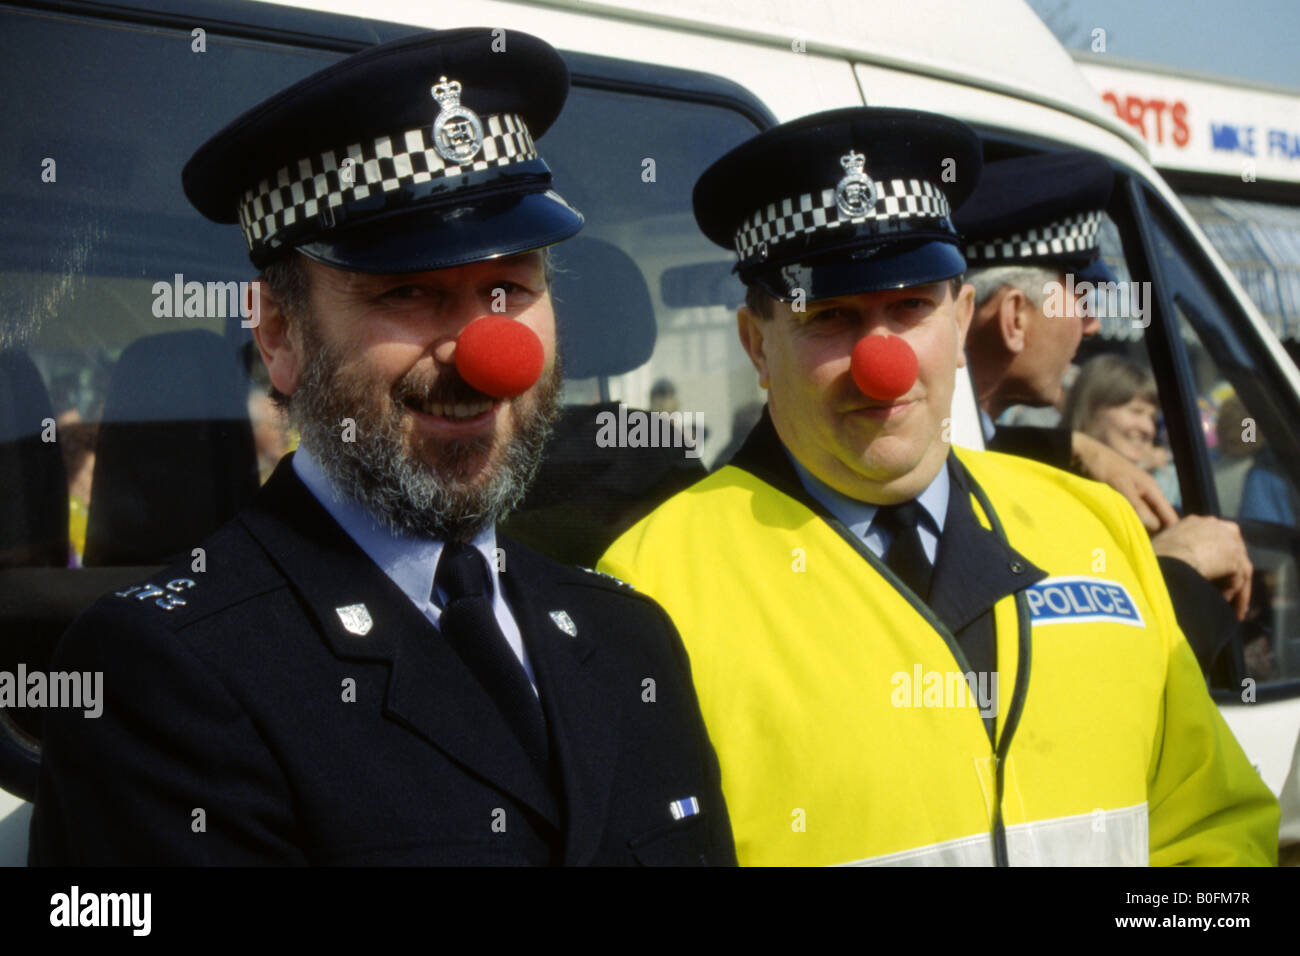 two-police-officers-with-red-noses-join-in-the-fun-at-the-last-clowns-B0FM7R.jpg